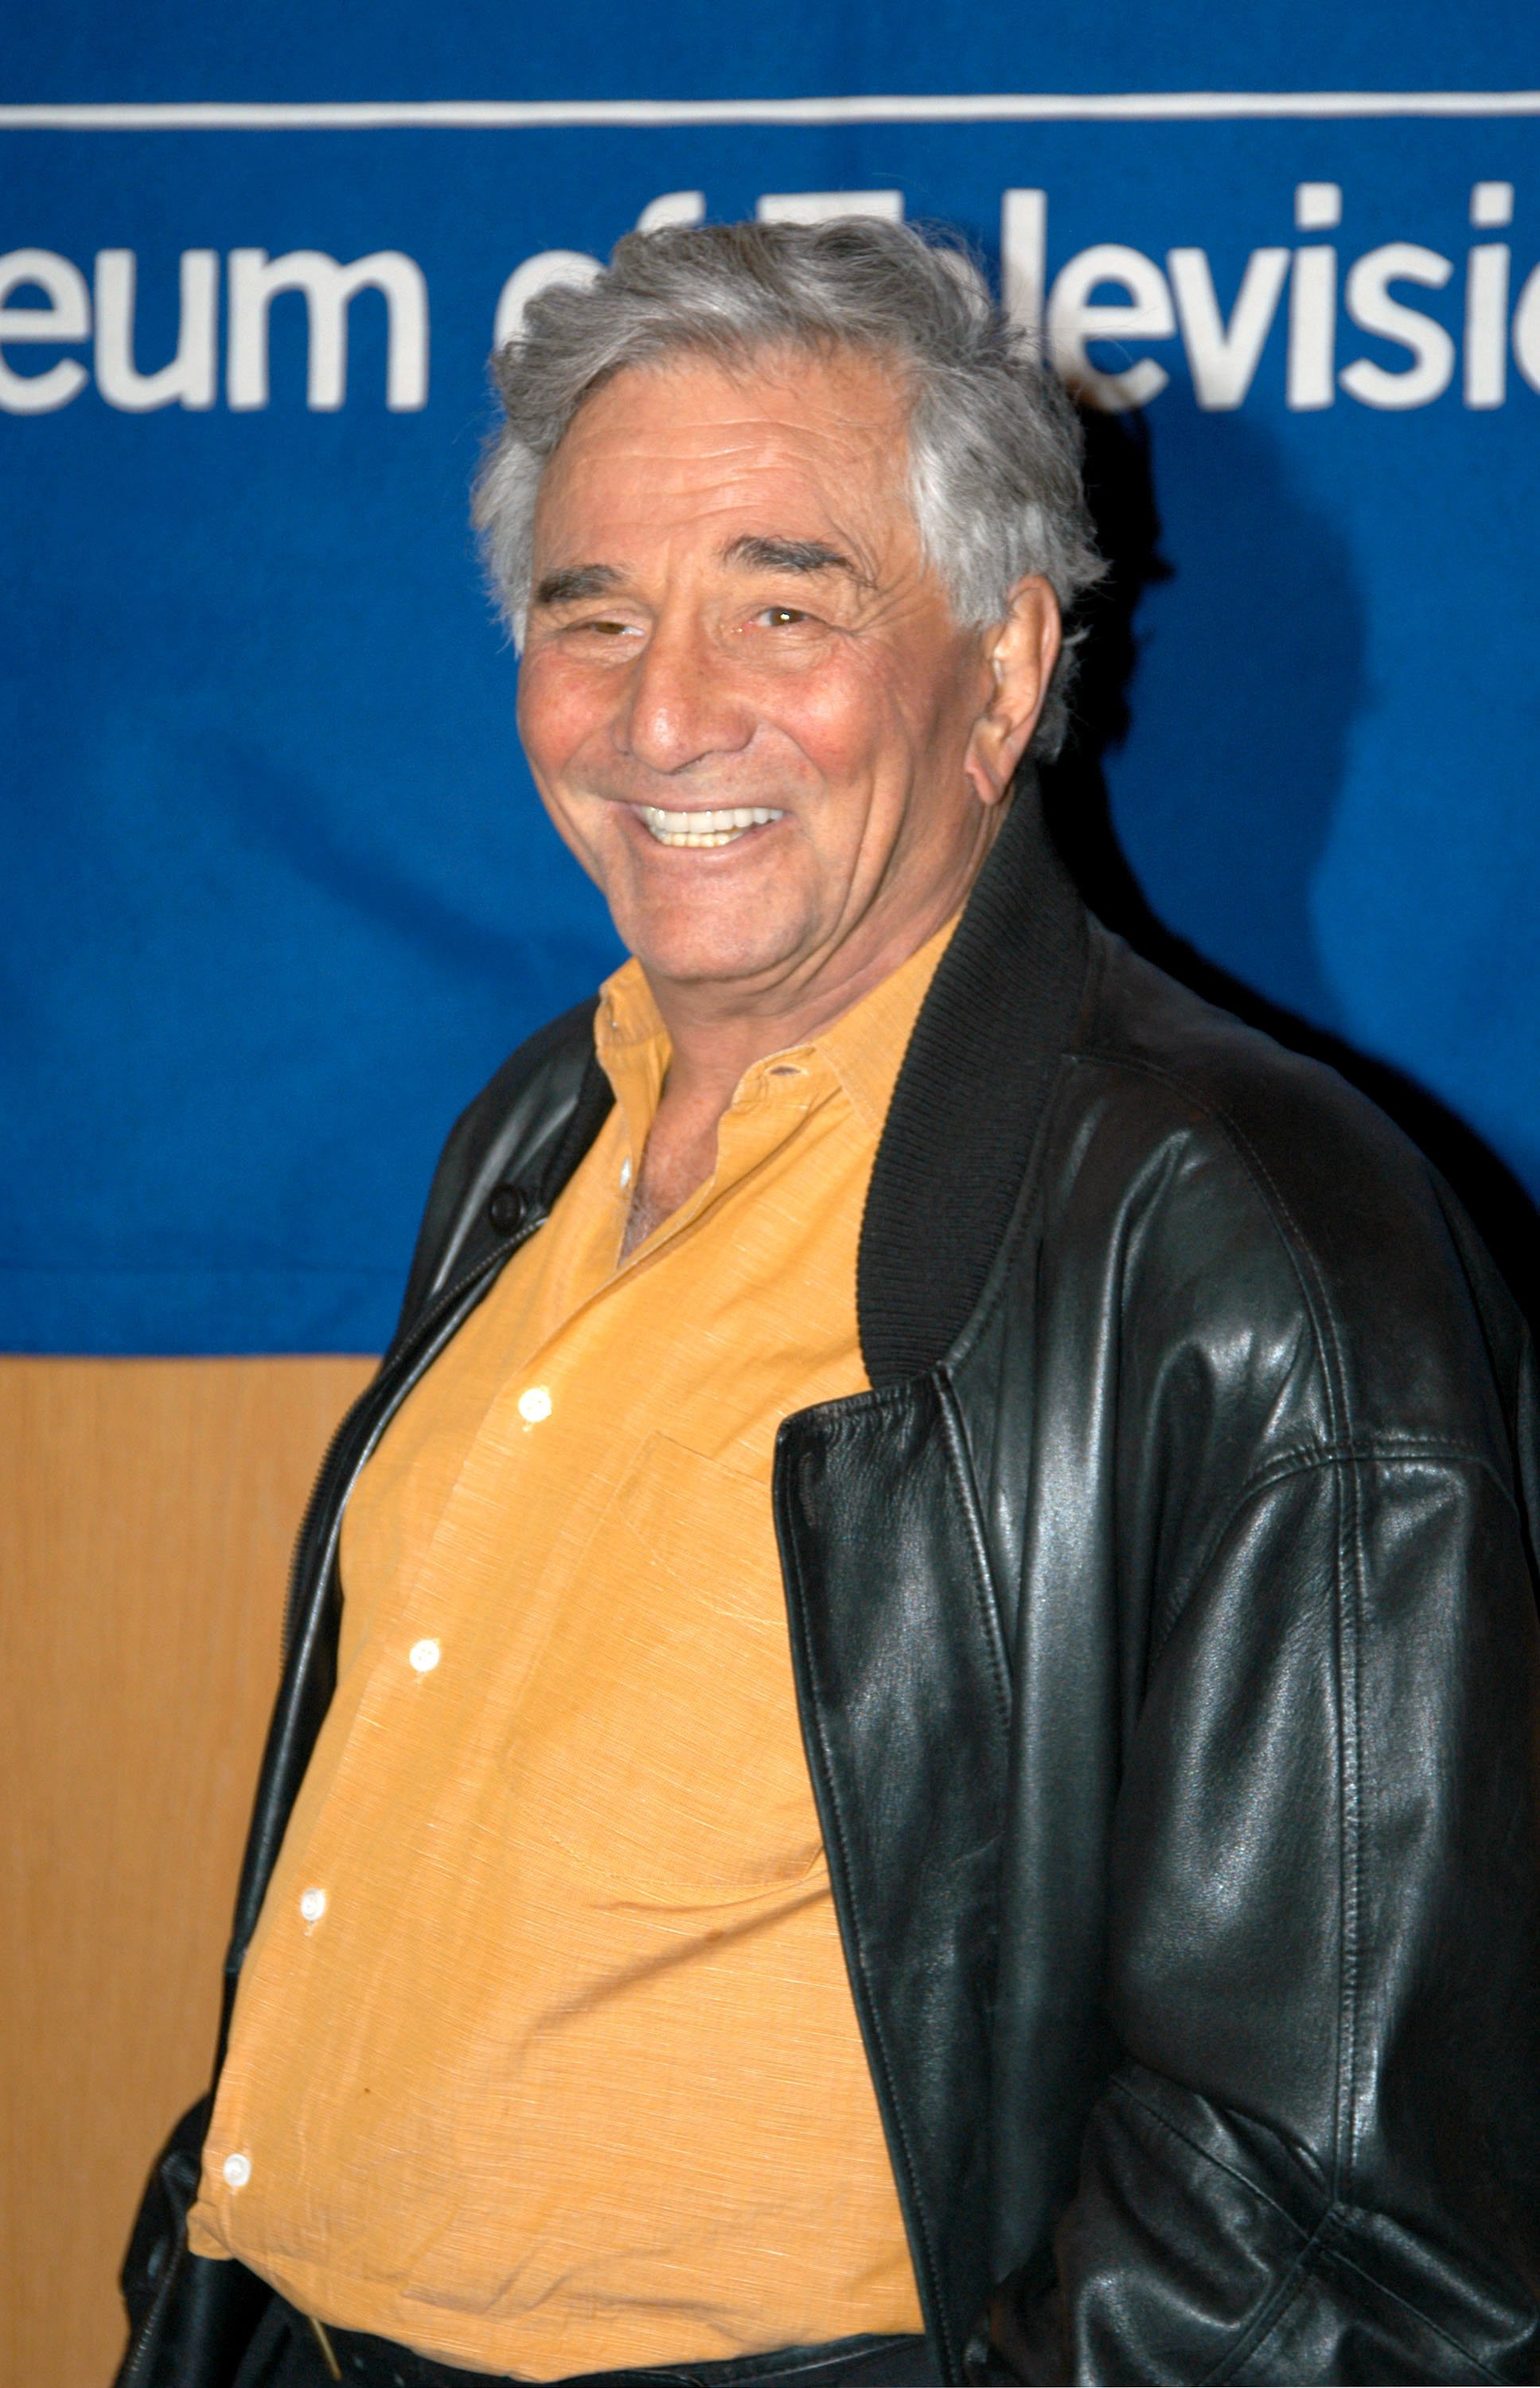 Peter Falk at the 20th Anniversary William S. Paley Television Festival Presents "Columbo" in Hollywood, California, on March 6, 2003. | Source: Getty Images